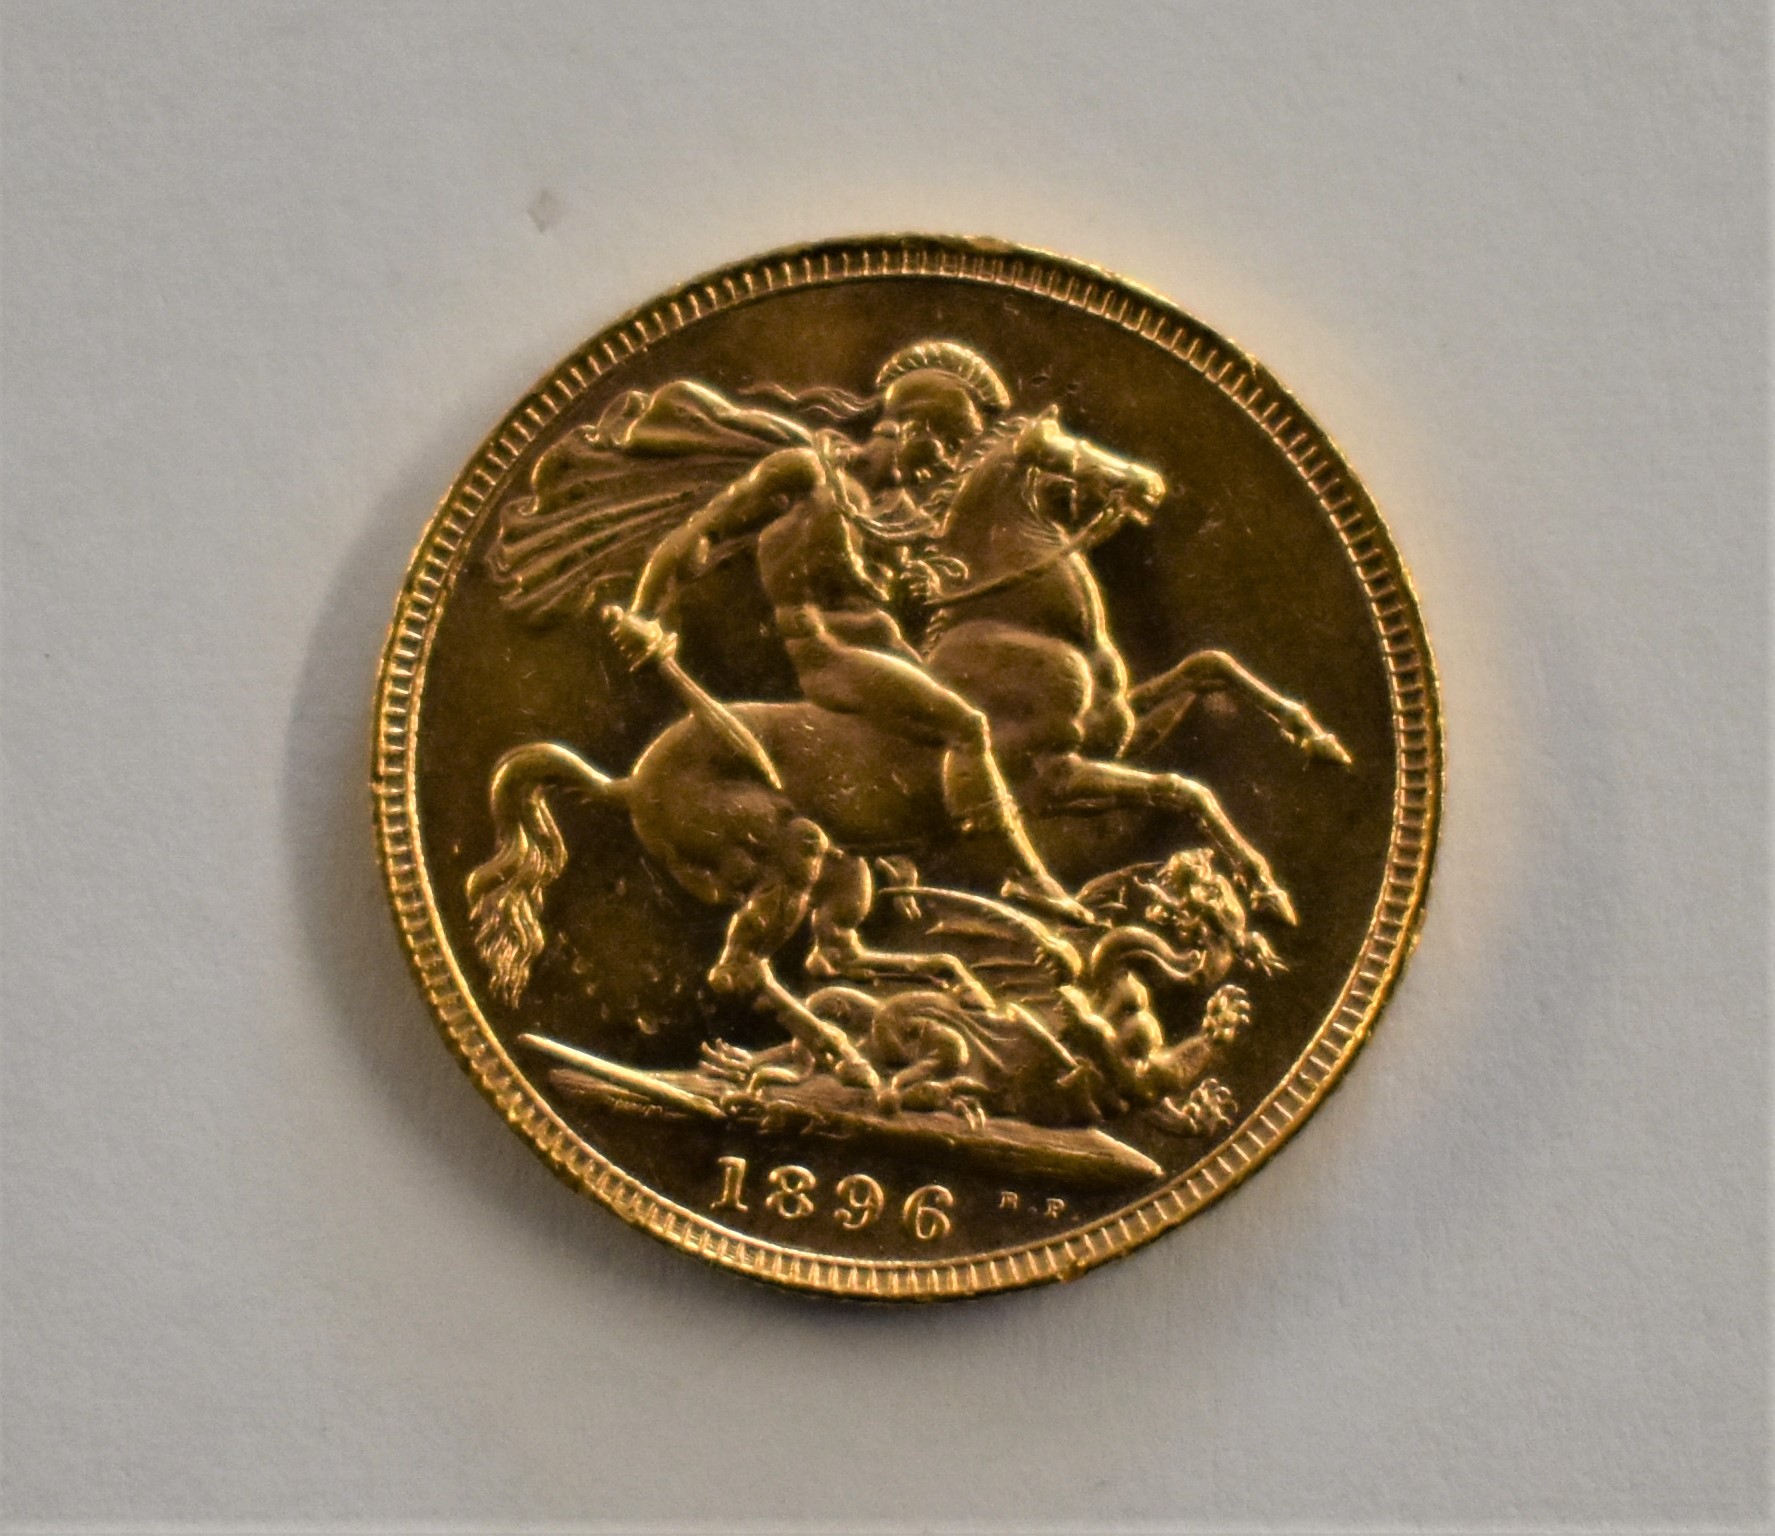 Gold 1896 Victoria old Head Sovereign, EF - Image 2 of 2